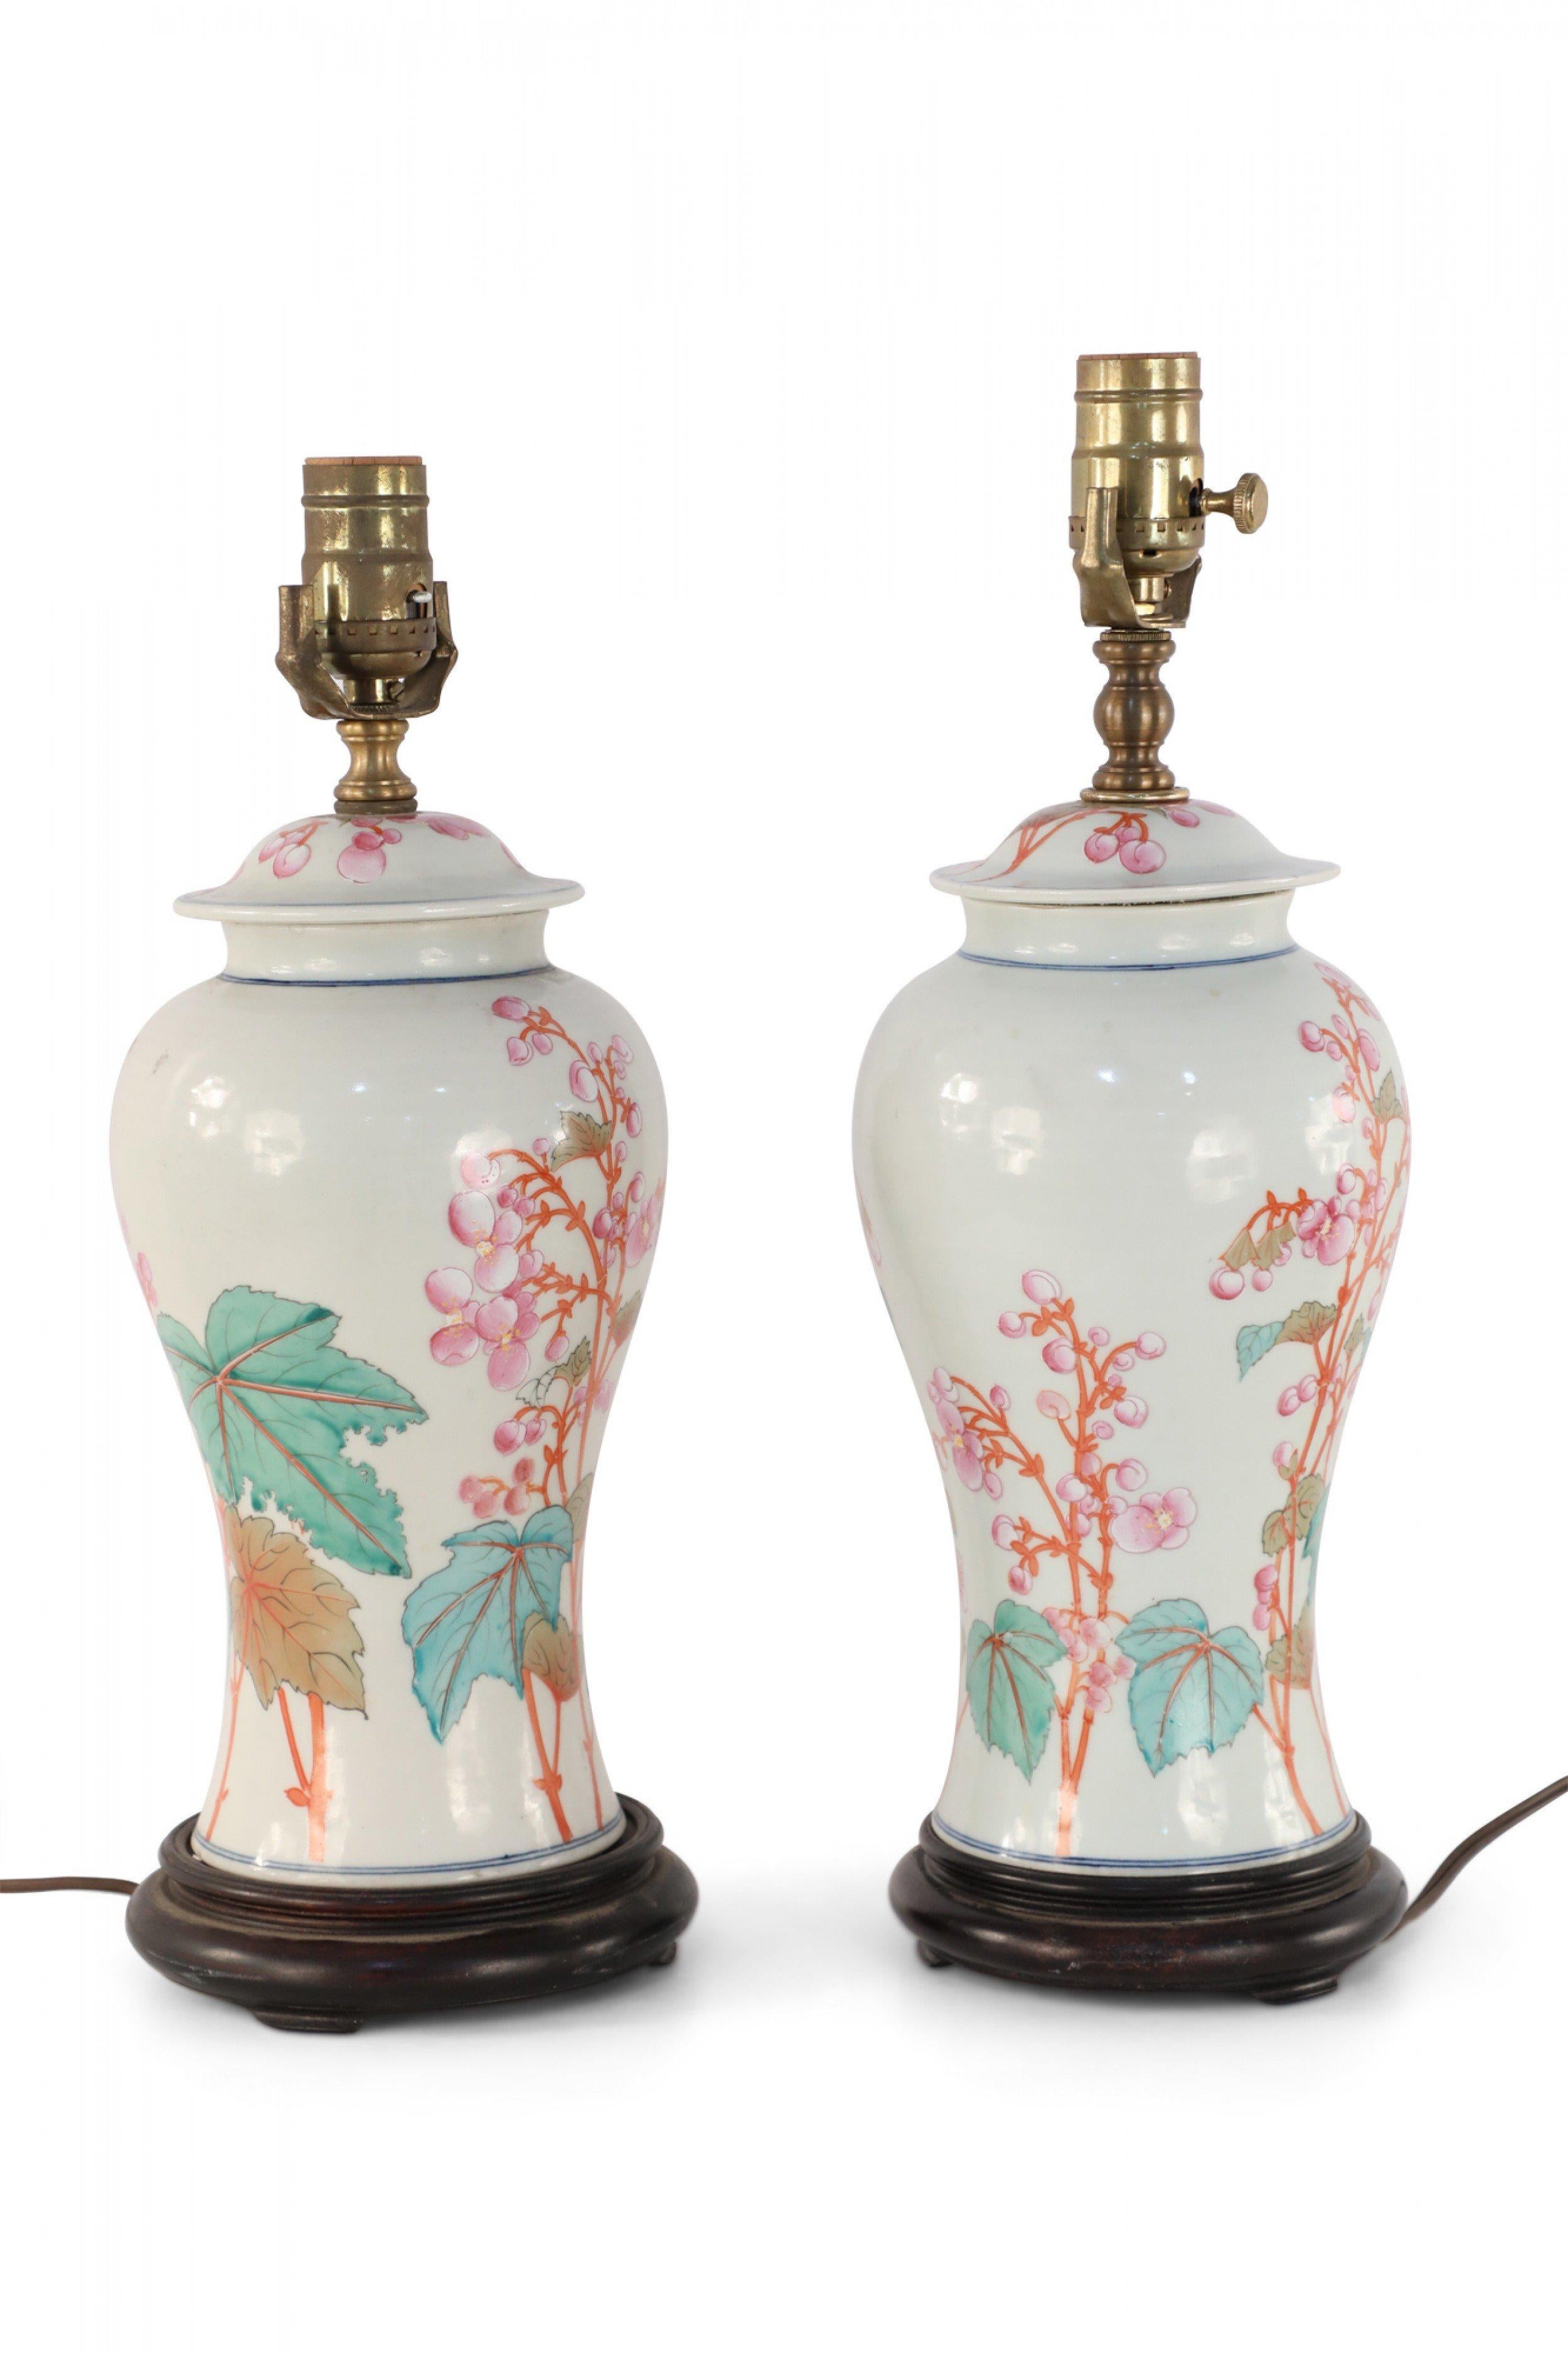 Pair of Chinese Off-White Orange and Pink Floral Motif Porcelain Table Lamps In Good Condition For Sale In New York, NY